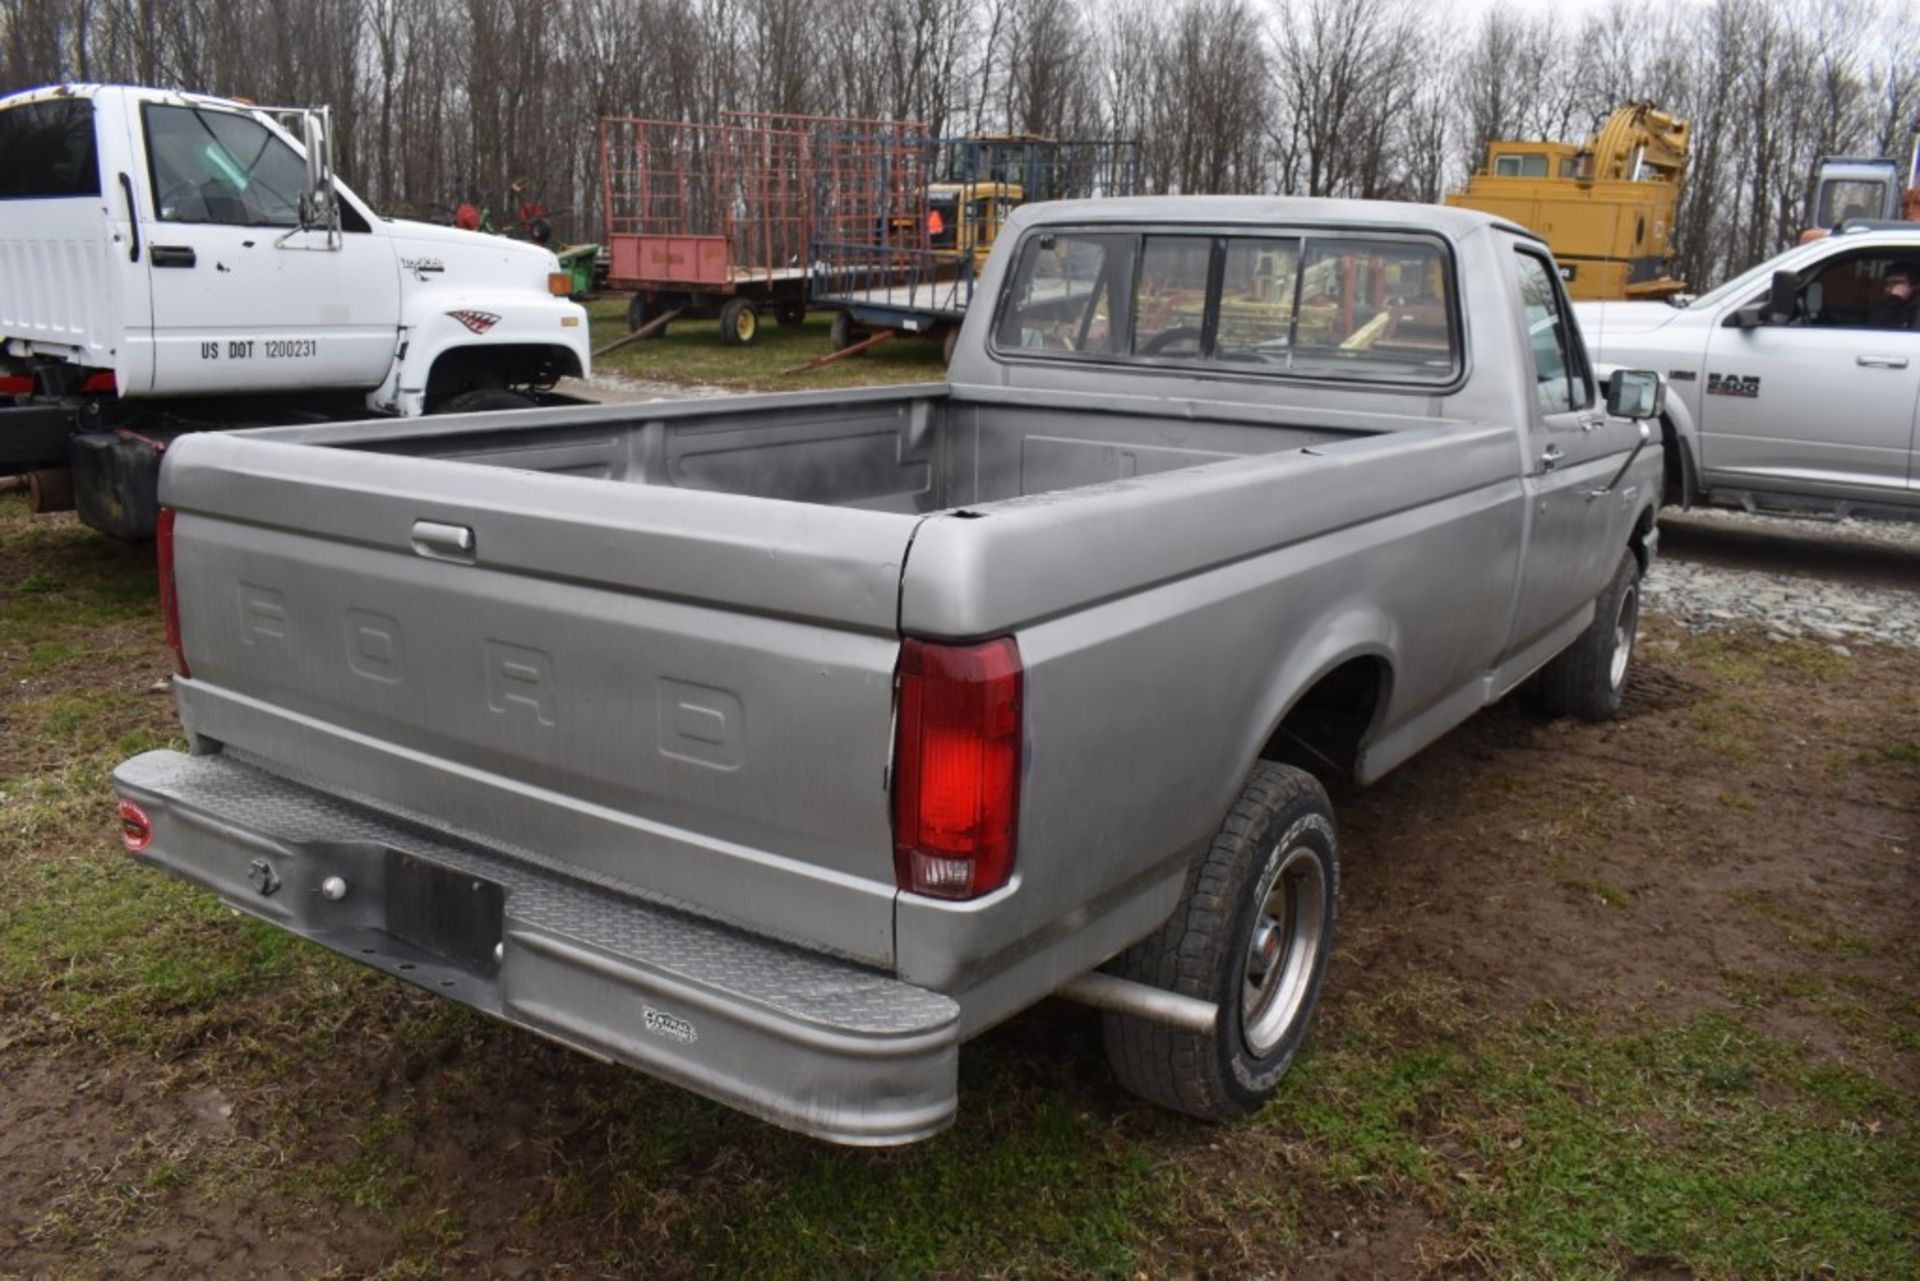 1987 Ford F-150 Truck - Image 11 of 36